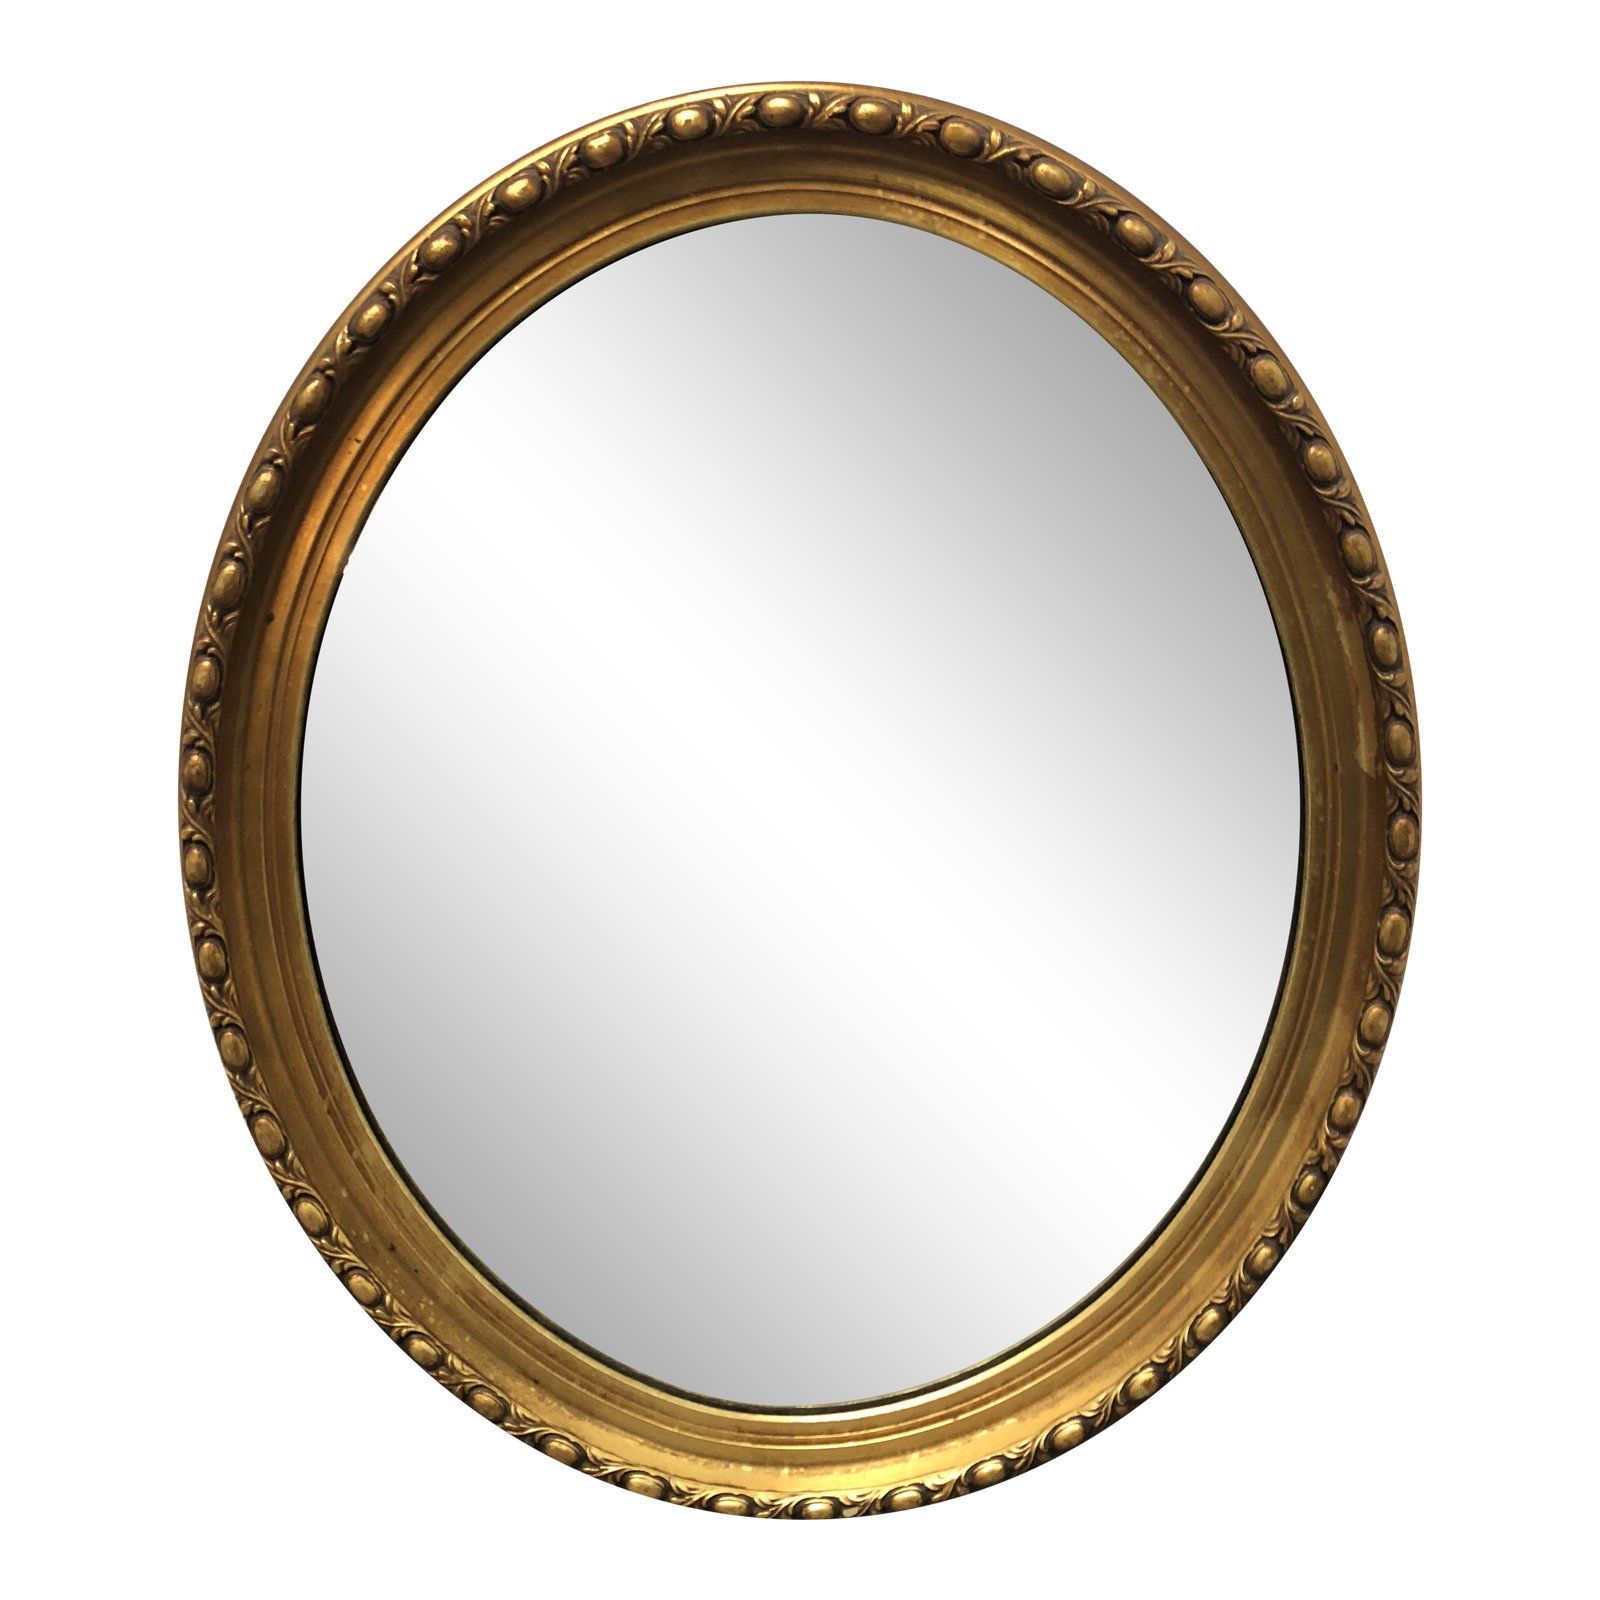 Vintage Round Gold Finish Wall Mirror | Design Plus Gallery In Gold Rounded Corner Wall Mirrors (View 13 of 15)